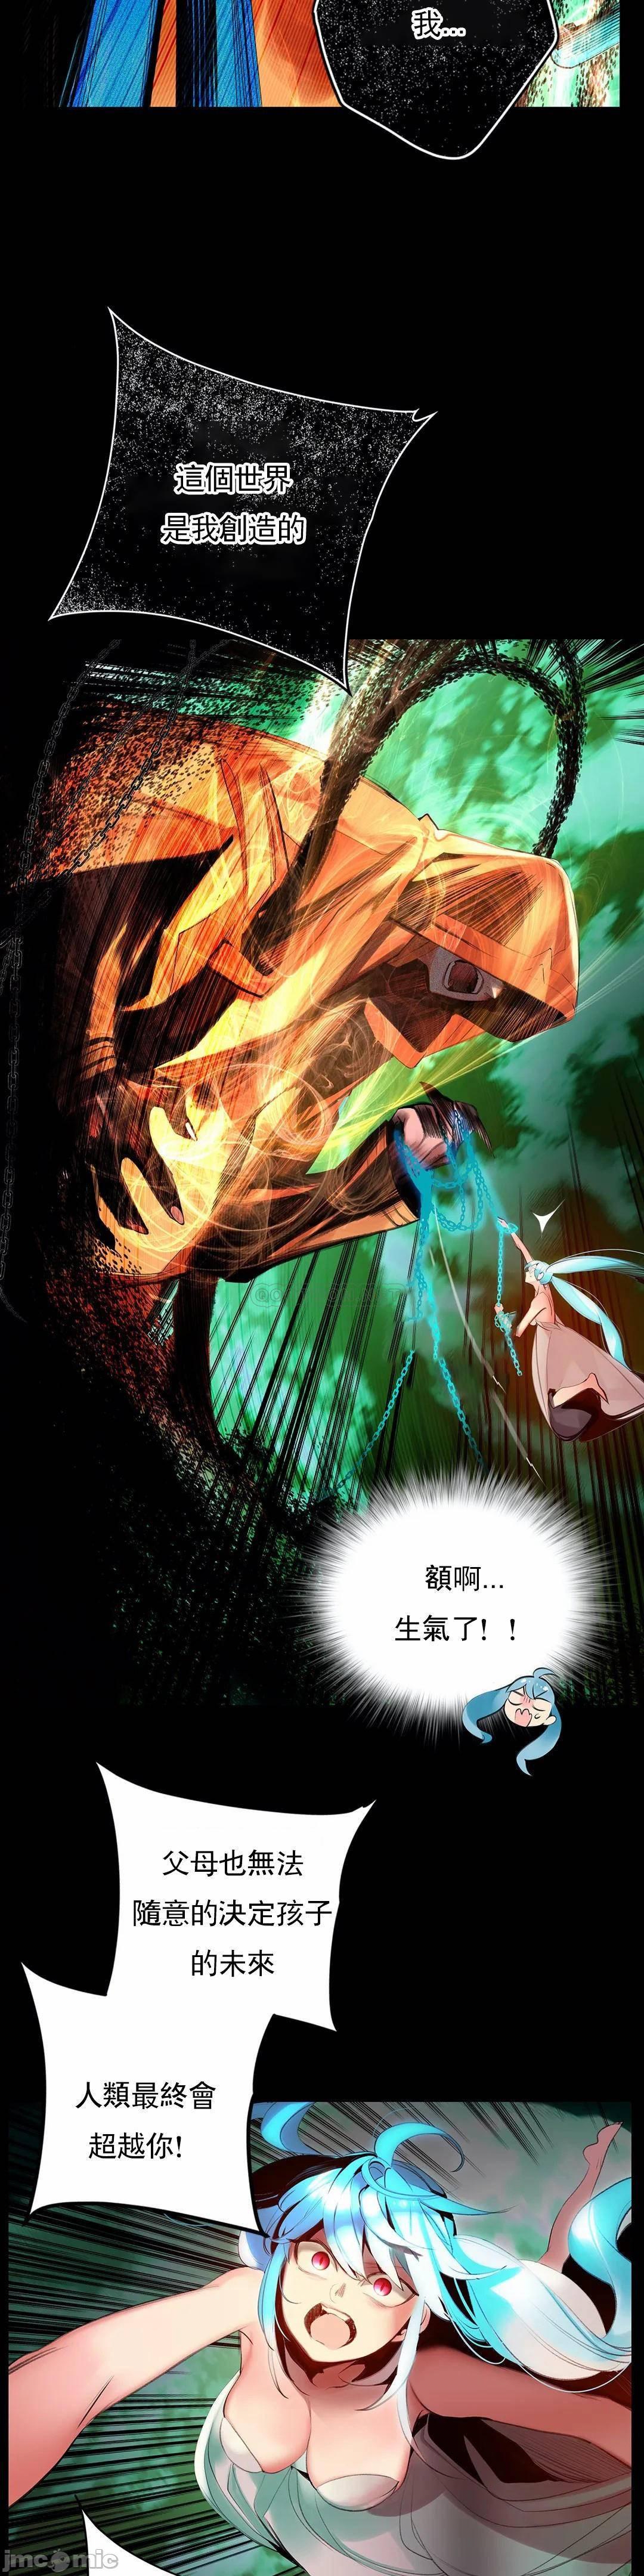 [Juder] Lilith`s Cord (第二季) Ch.77-93 end [Chinese] 445